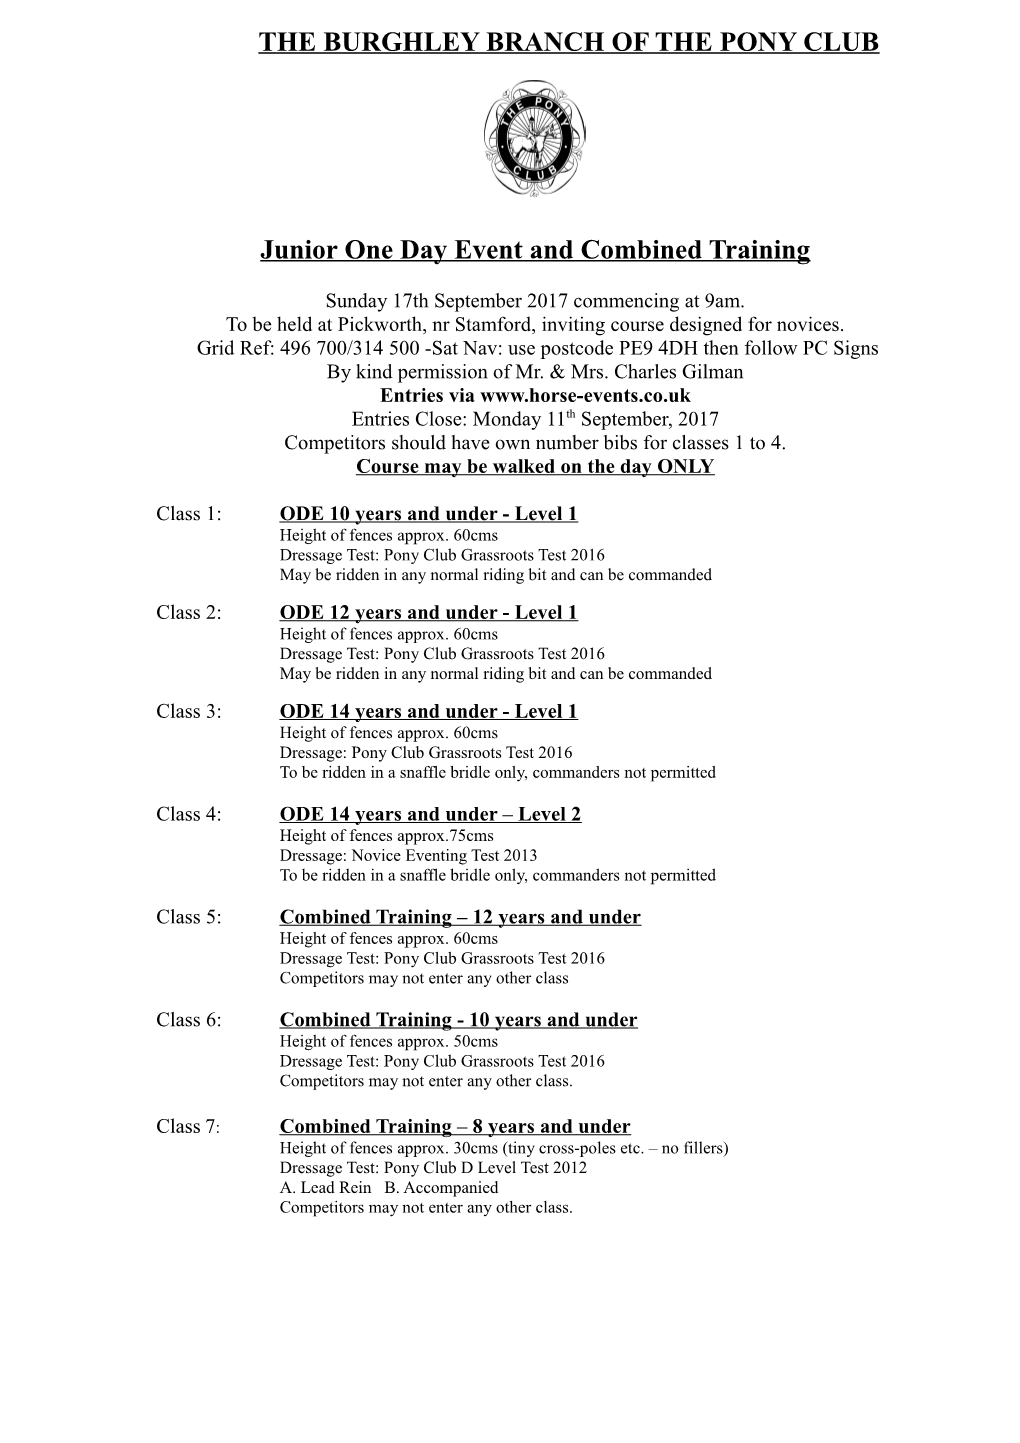 Junior One Day Event and Combined Training